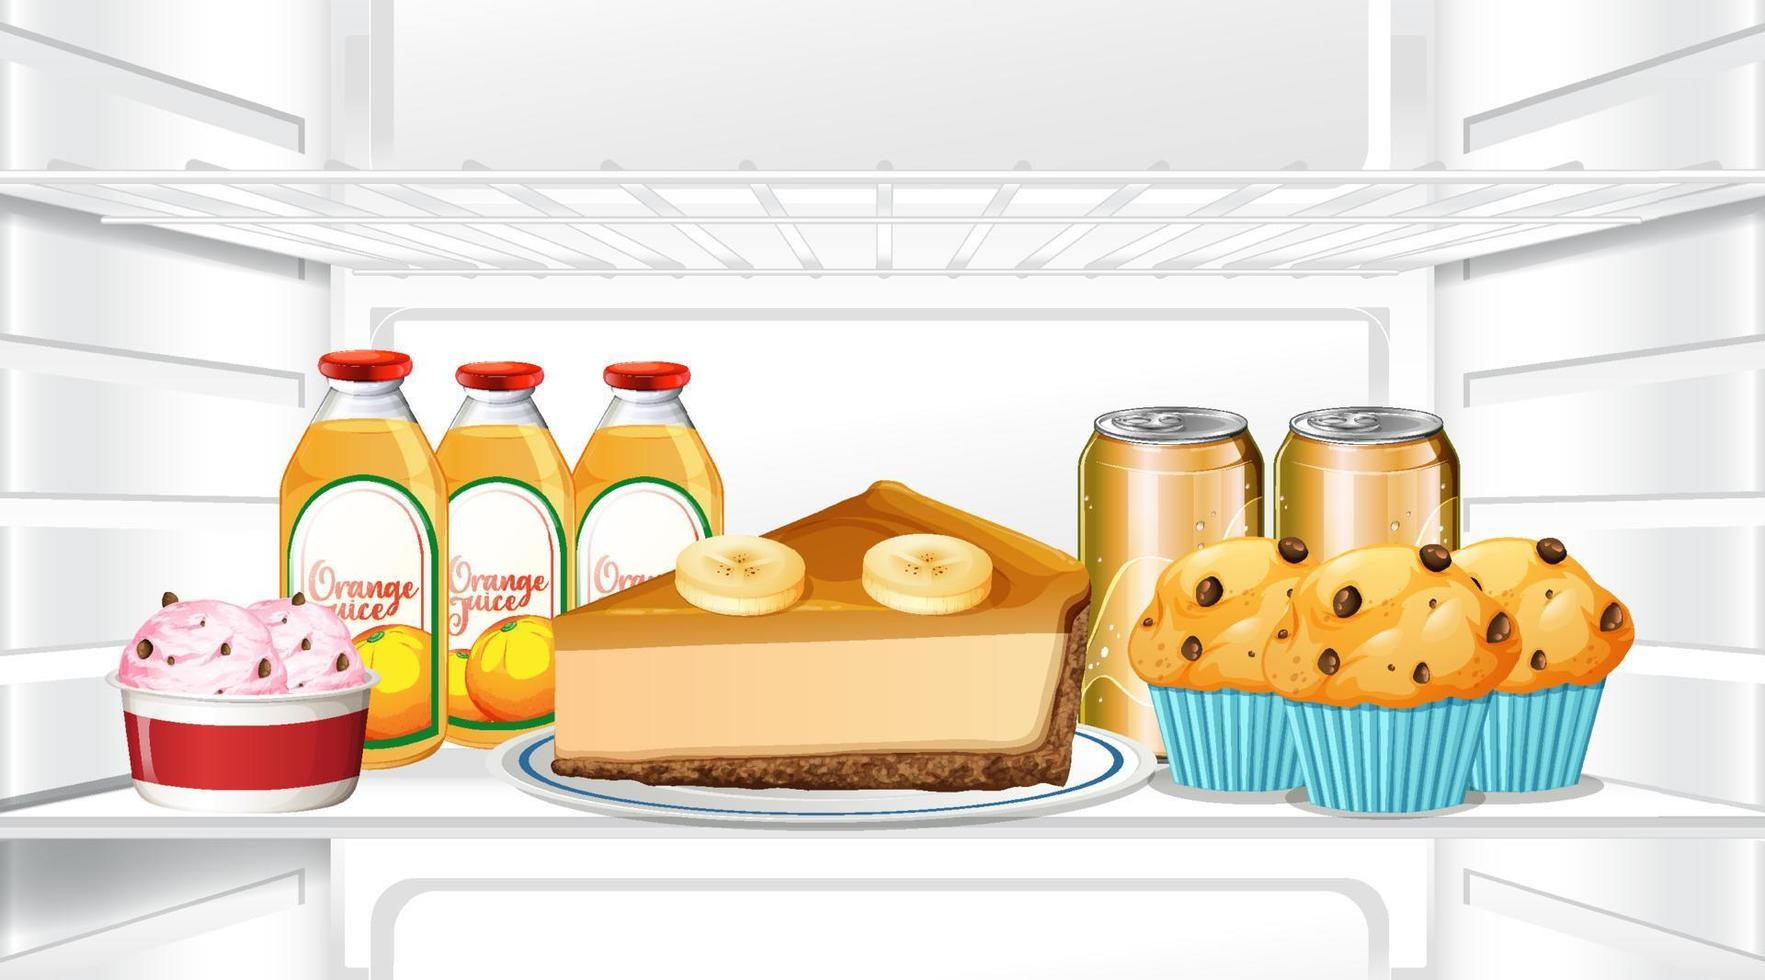 An inside the refrigerator with food vector